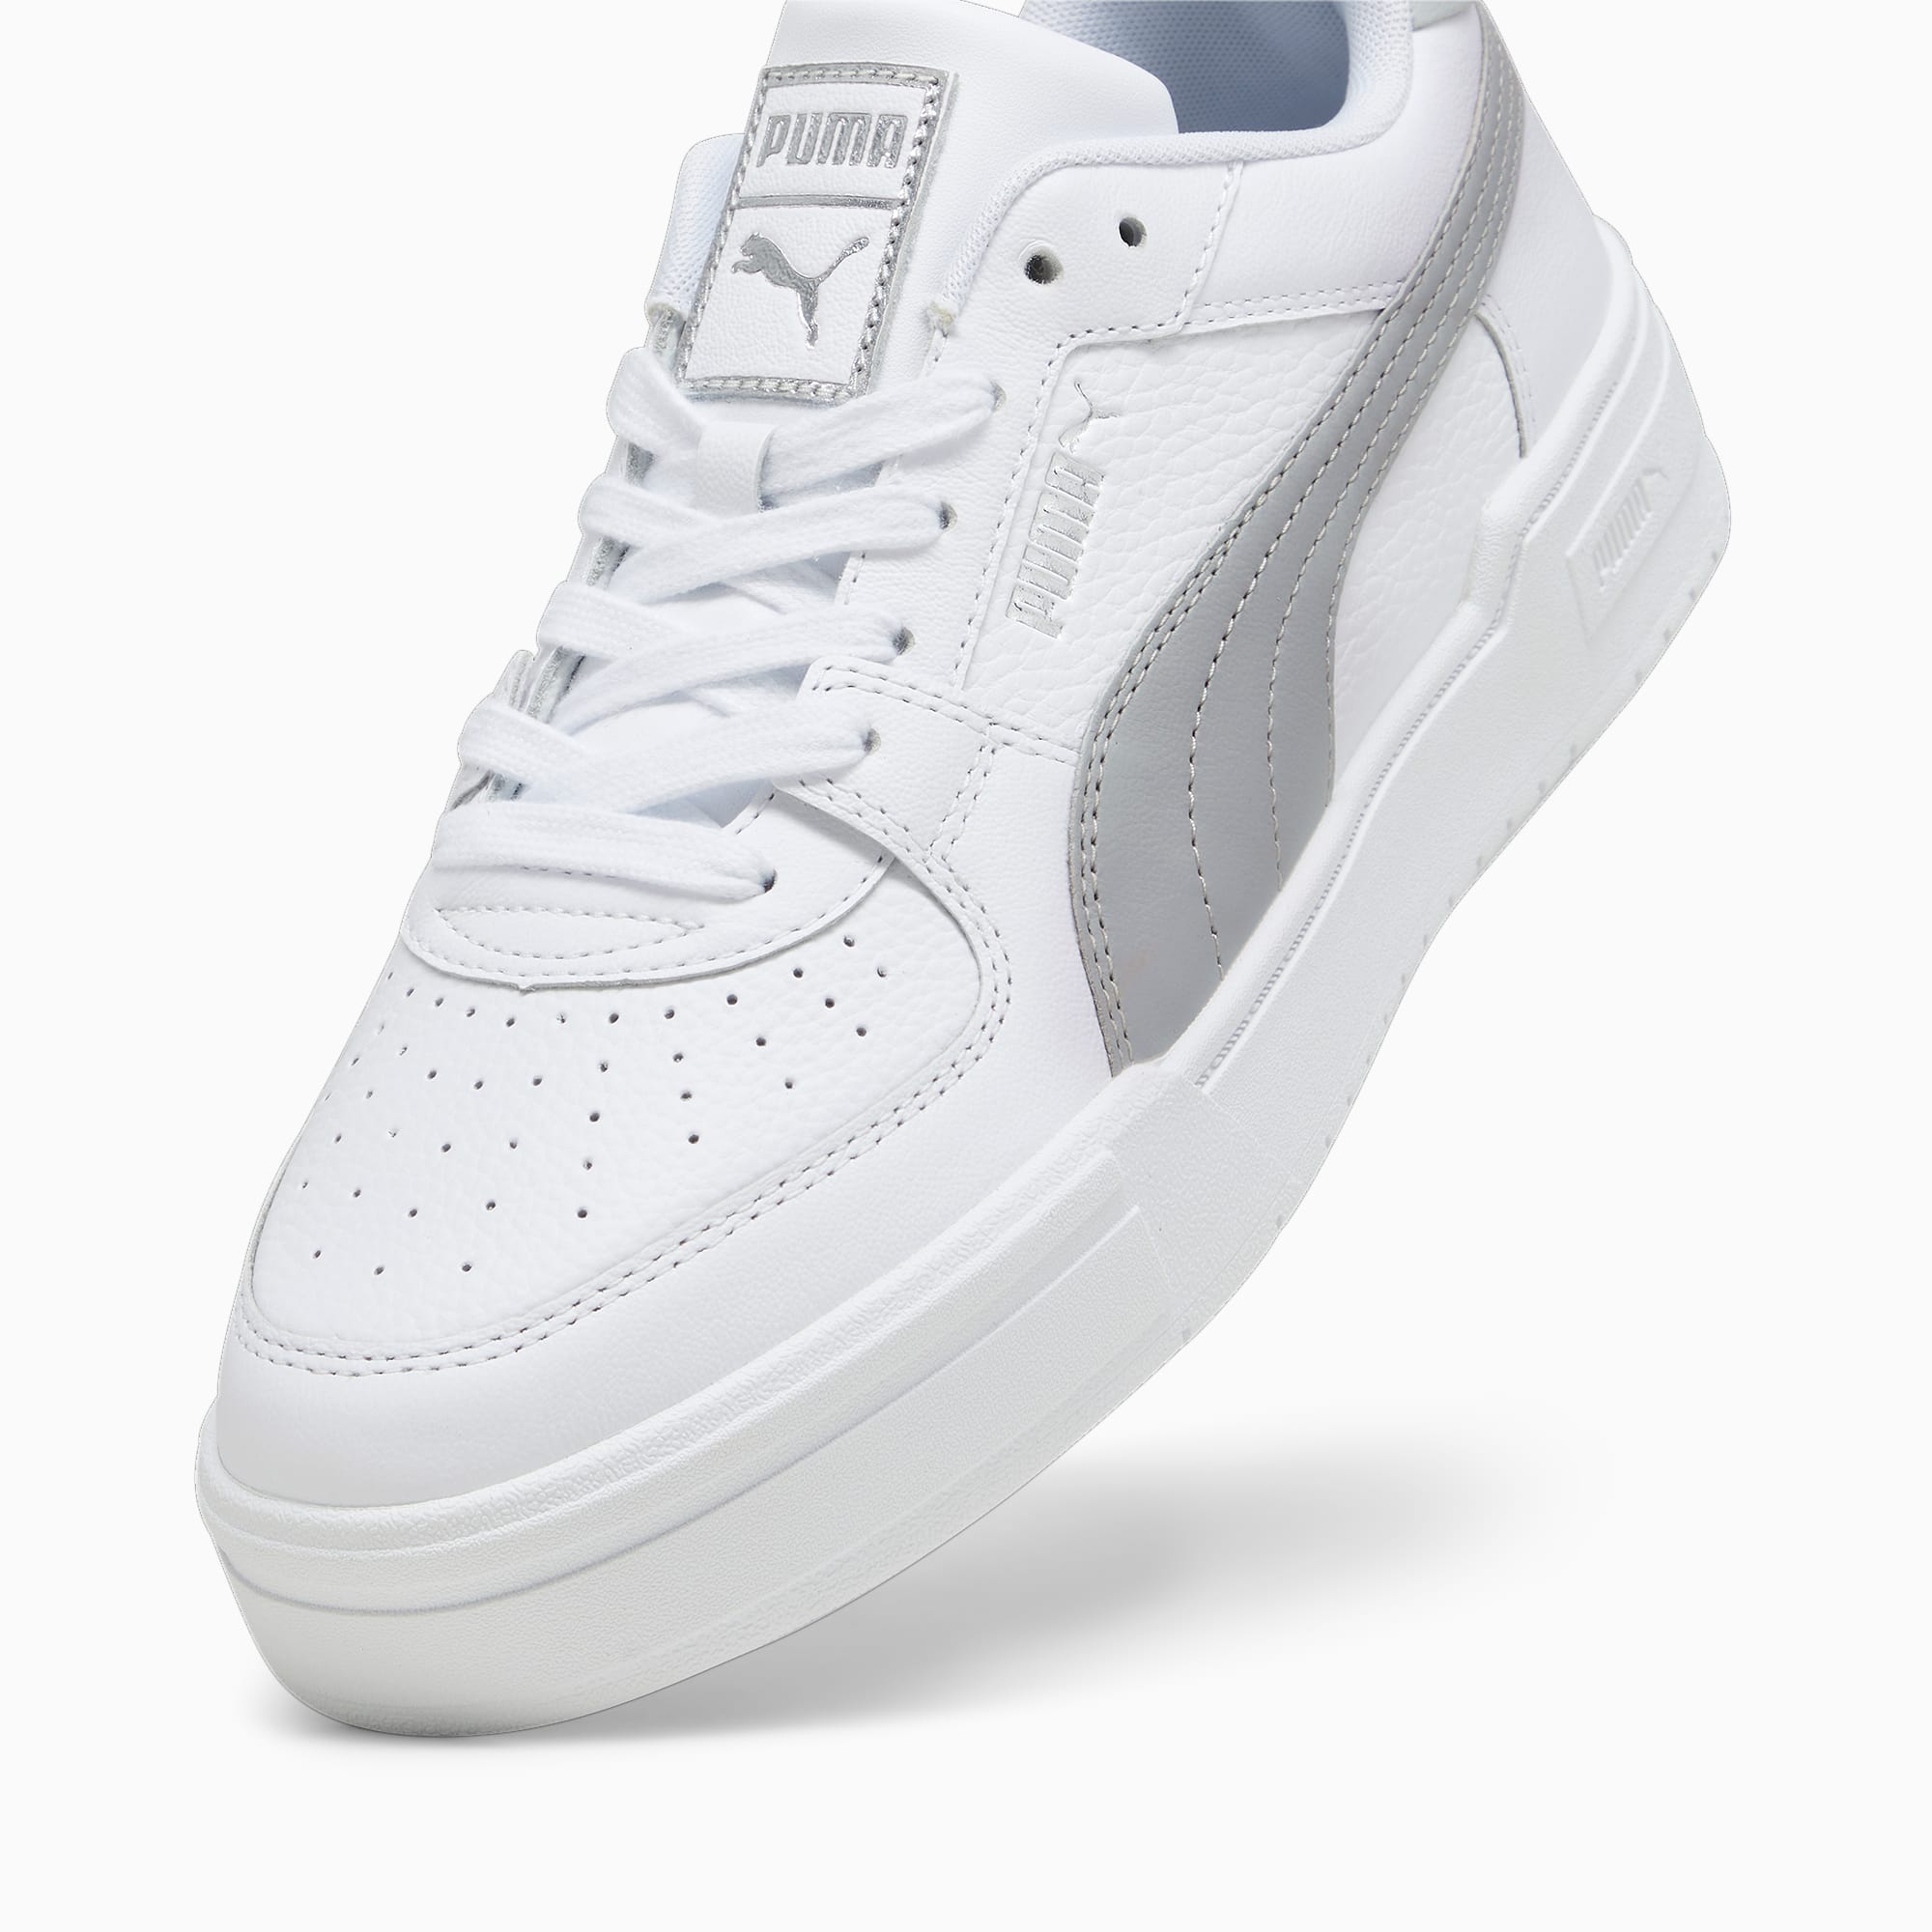 Women's PUMA Ca Pro Classic Trainers, White/Cool Light Grey, Size 36, Shoes